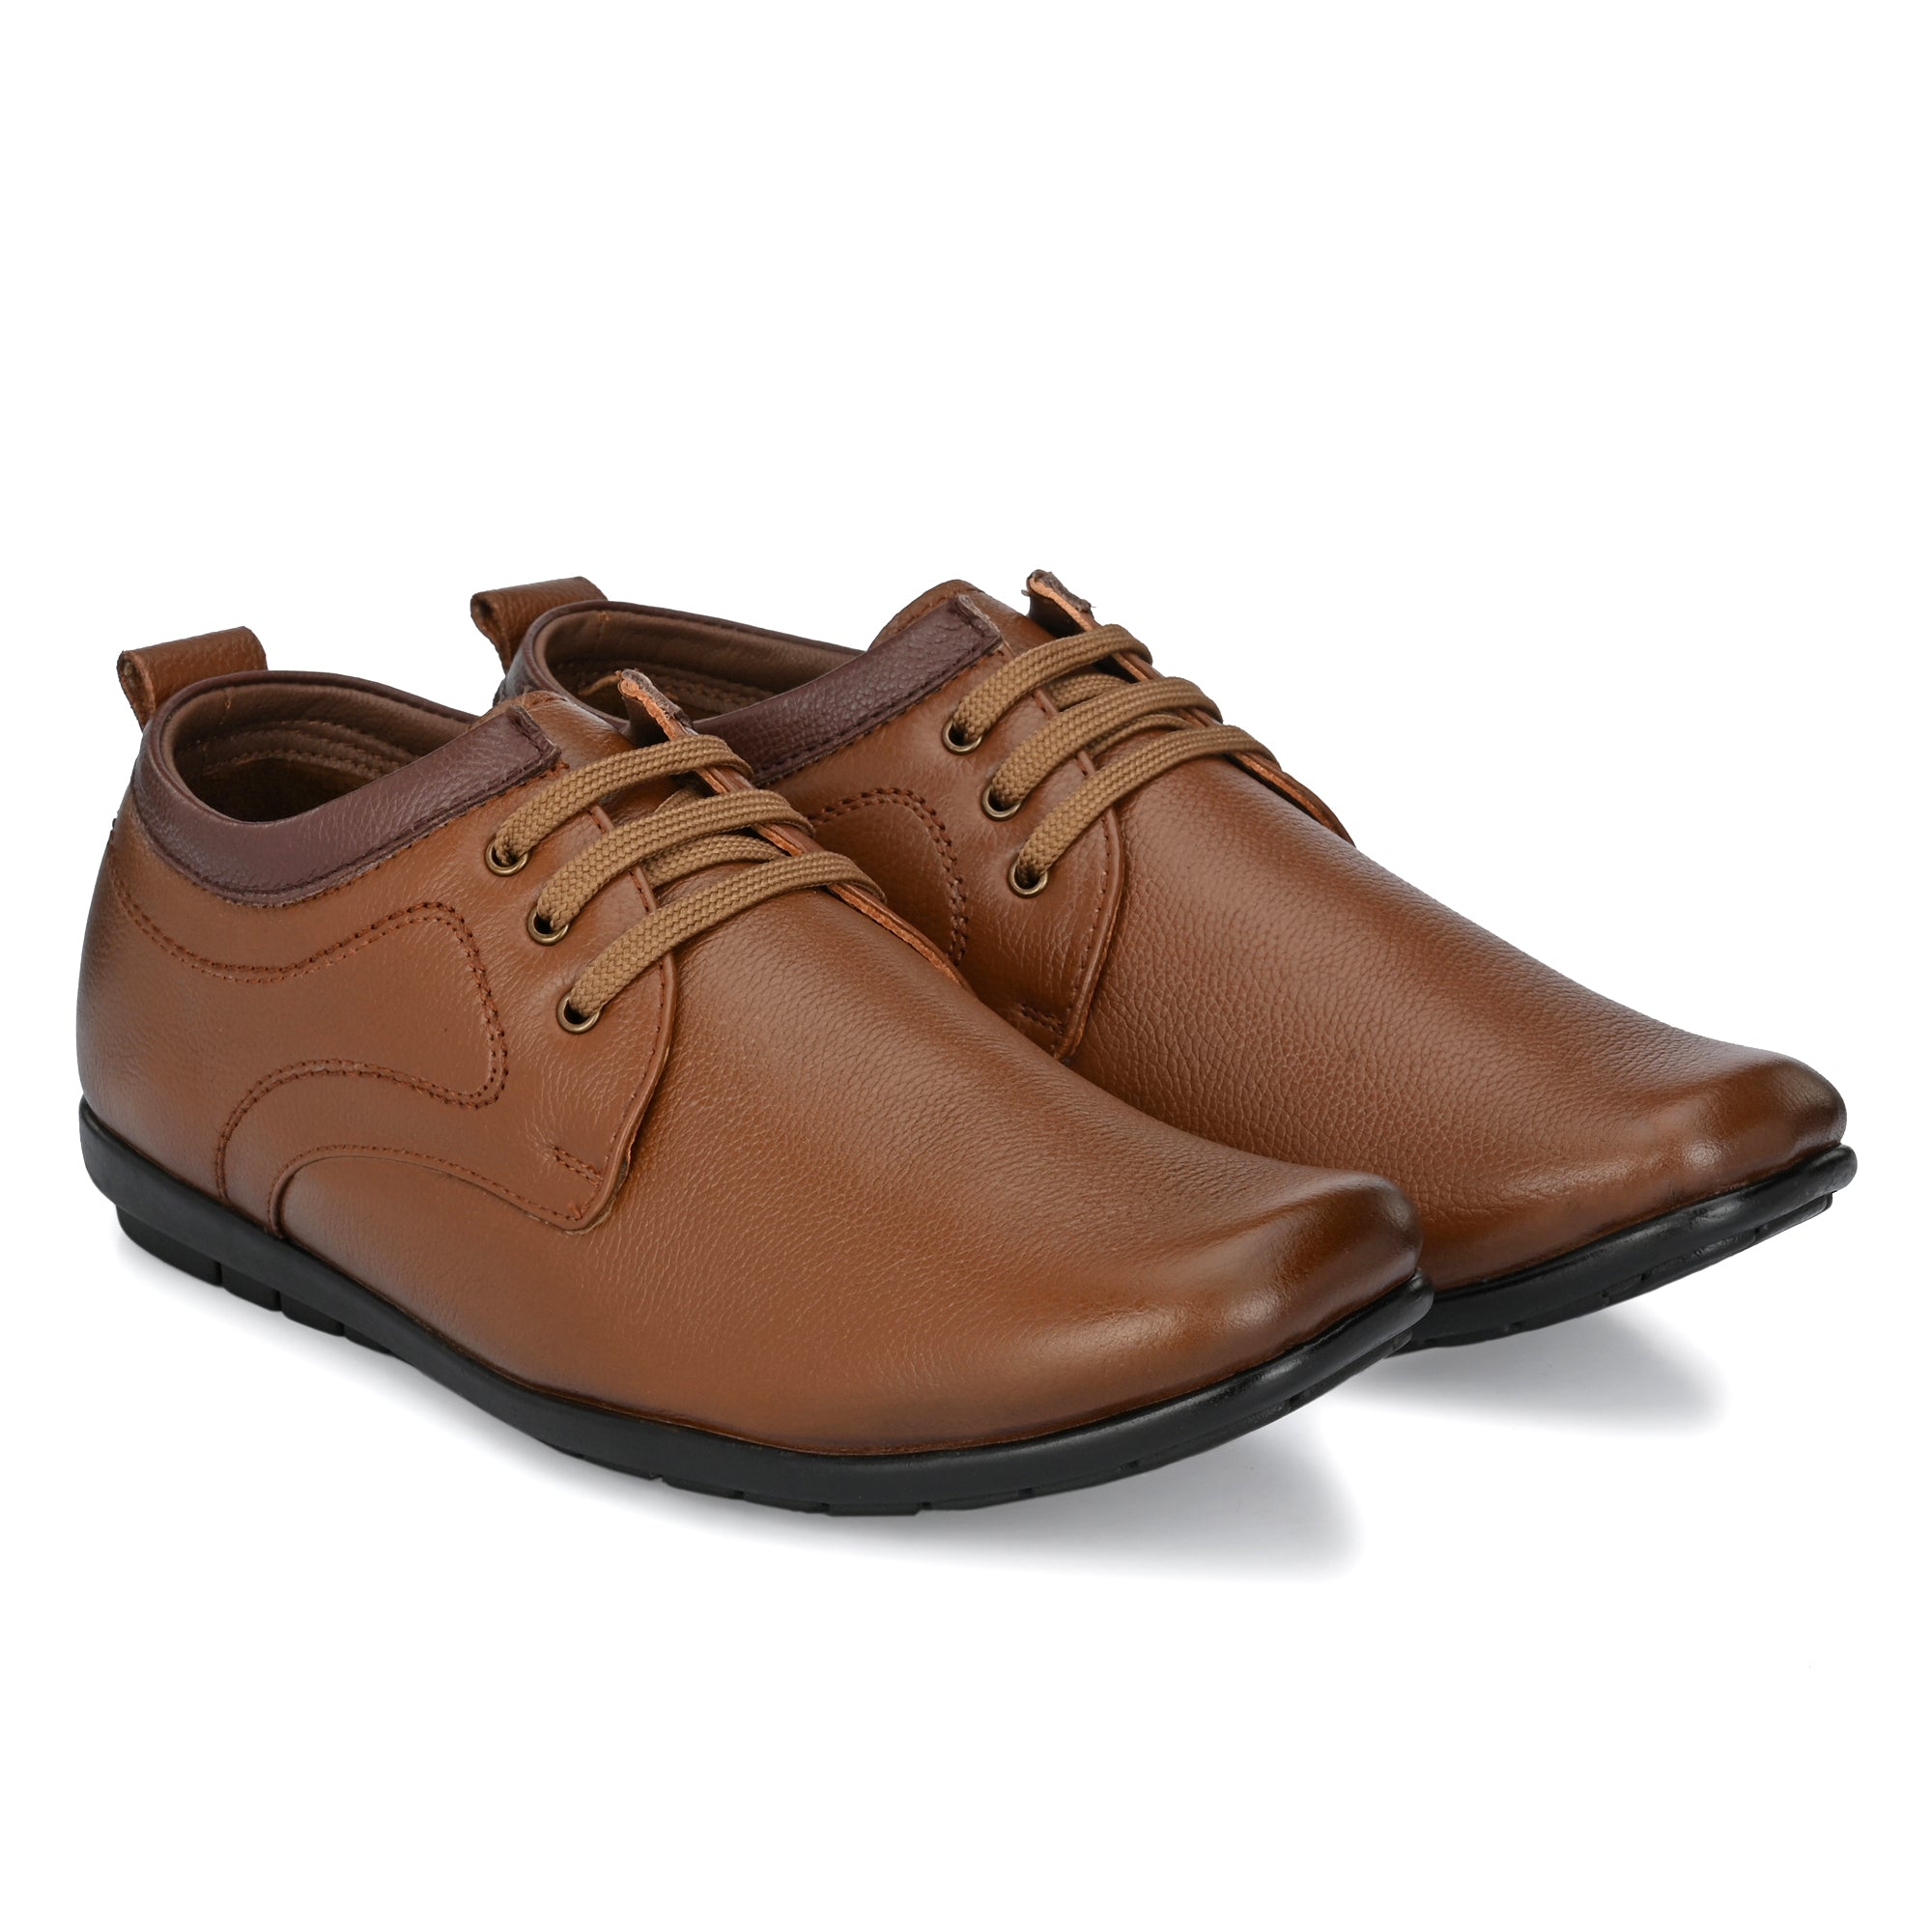 Egoss Casual Genuine Leather Shoes For Men